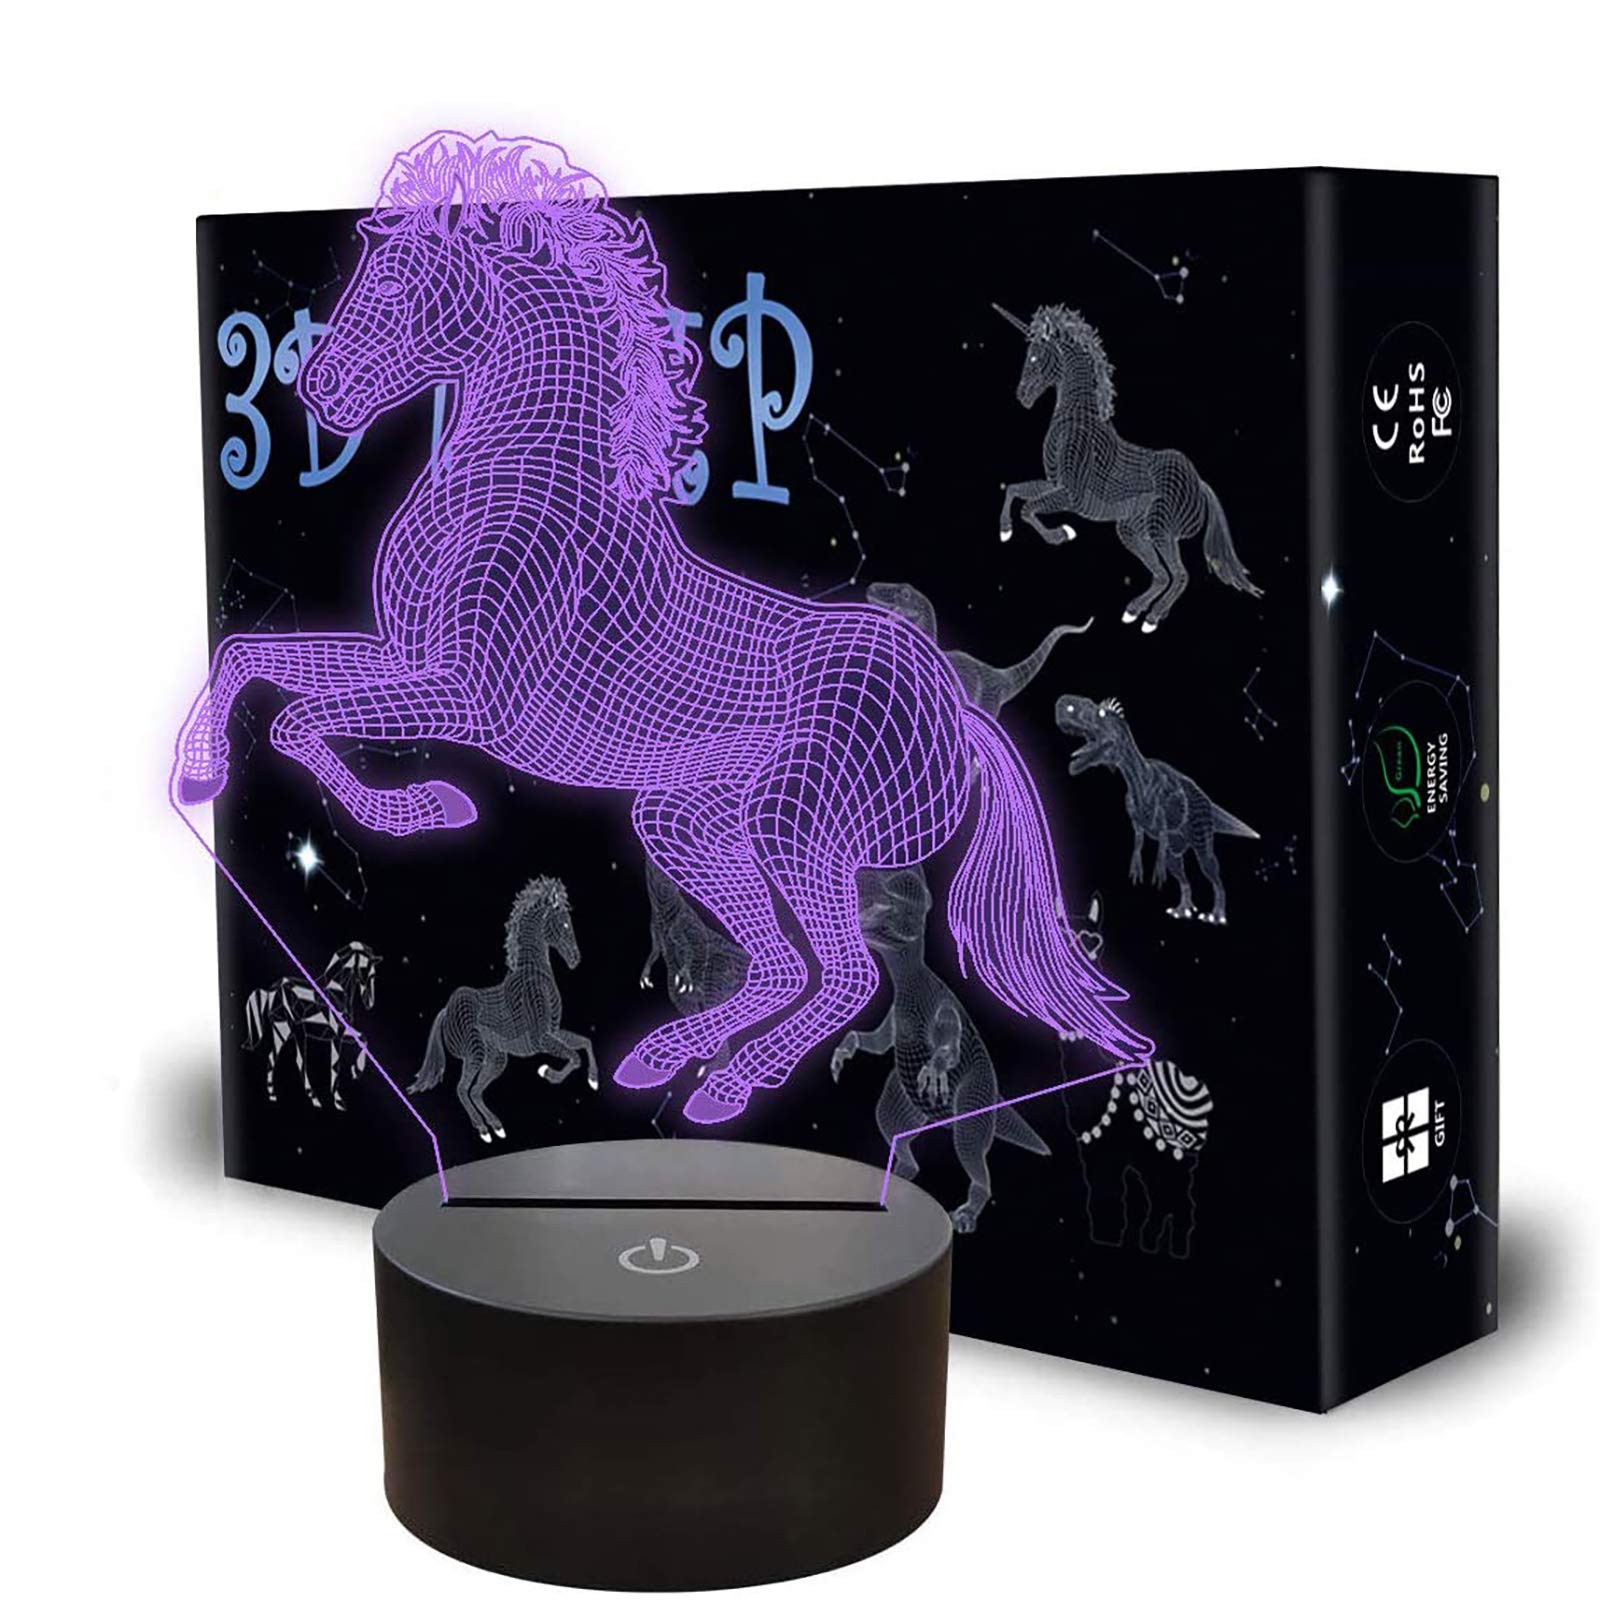 Horse 3D Lamp, LED 3D Night Light 7 Colors Changing with Touch Switch & USB Charge Kids Bedside Table Lamp for Girls Christmas Birthday Gifts Home Decor Light by QpenguinBabies